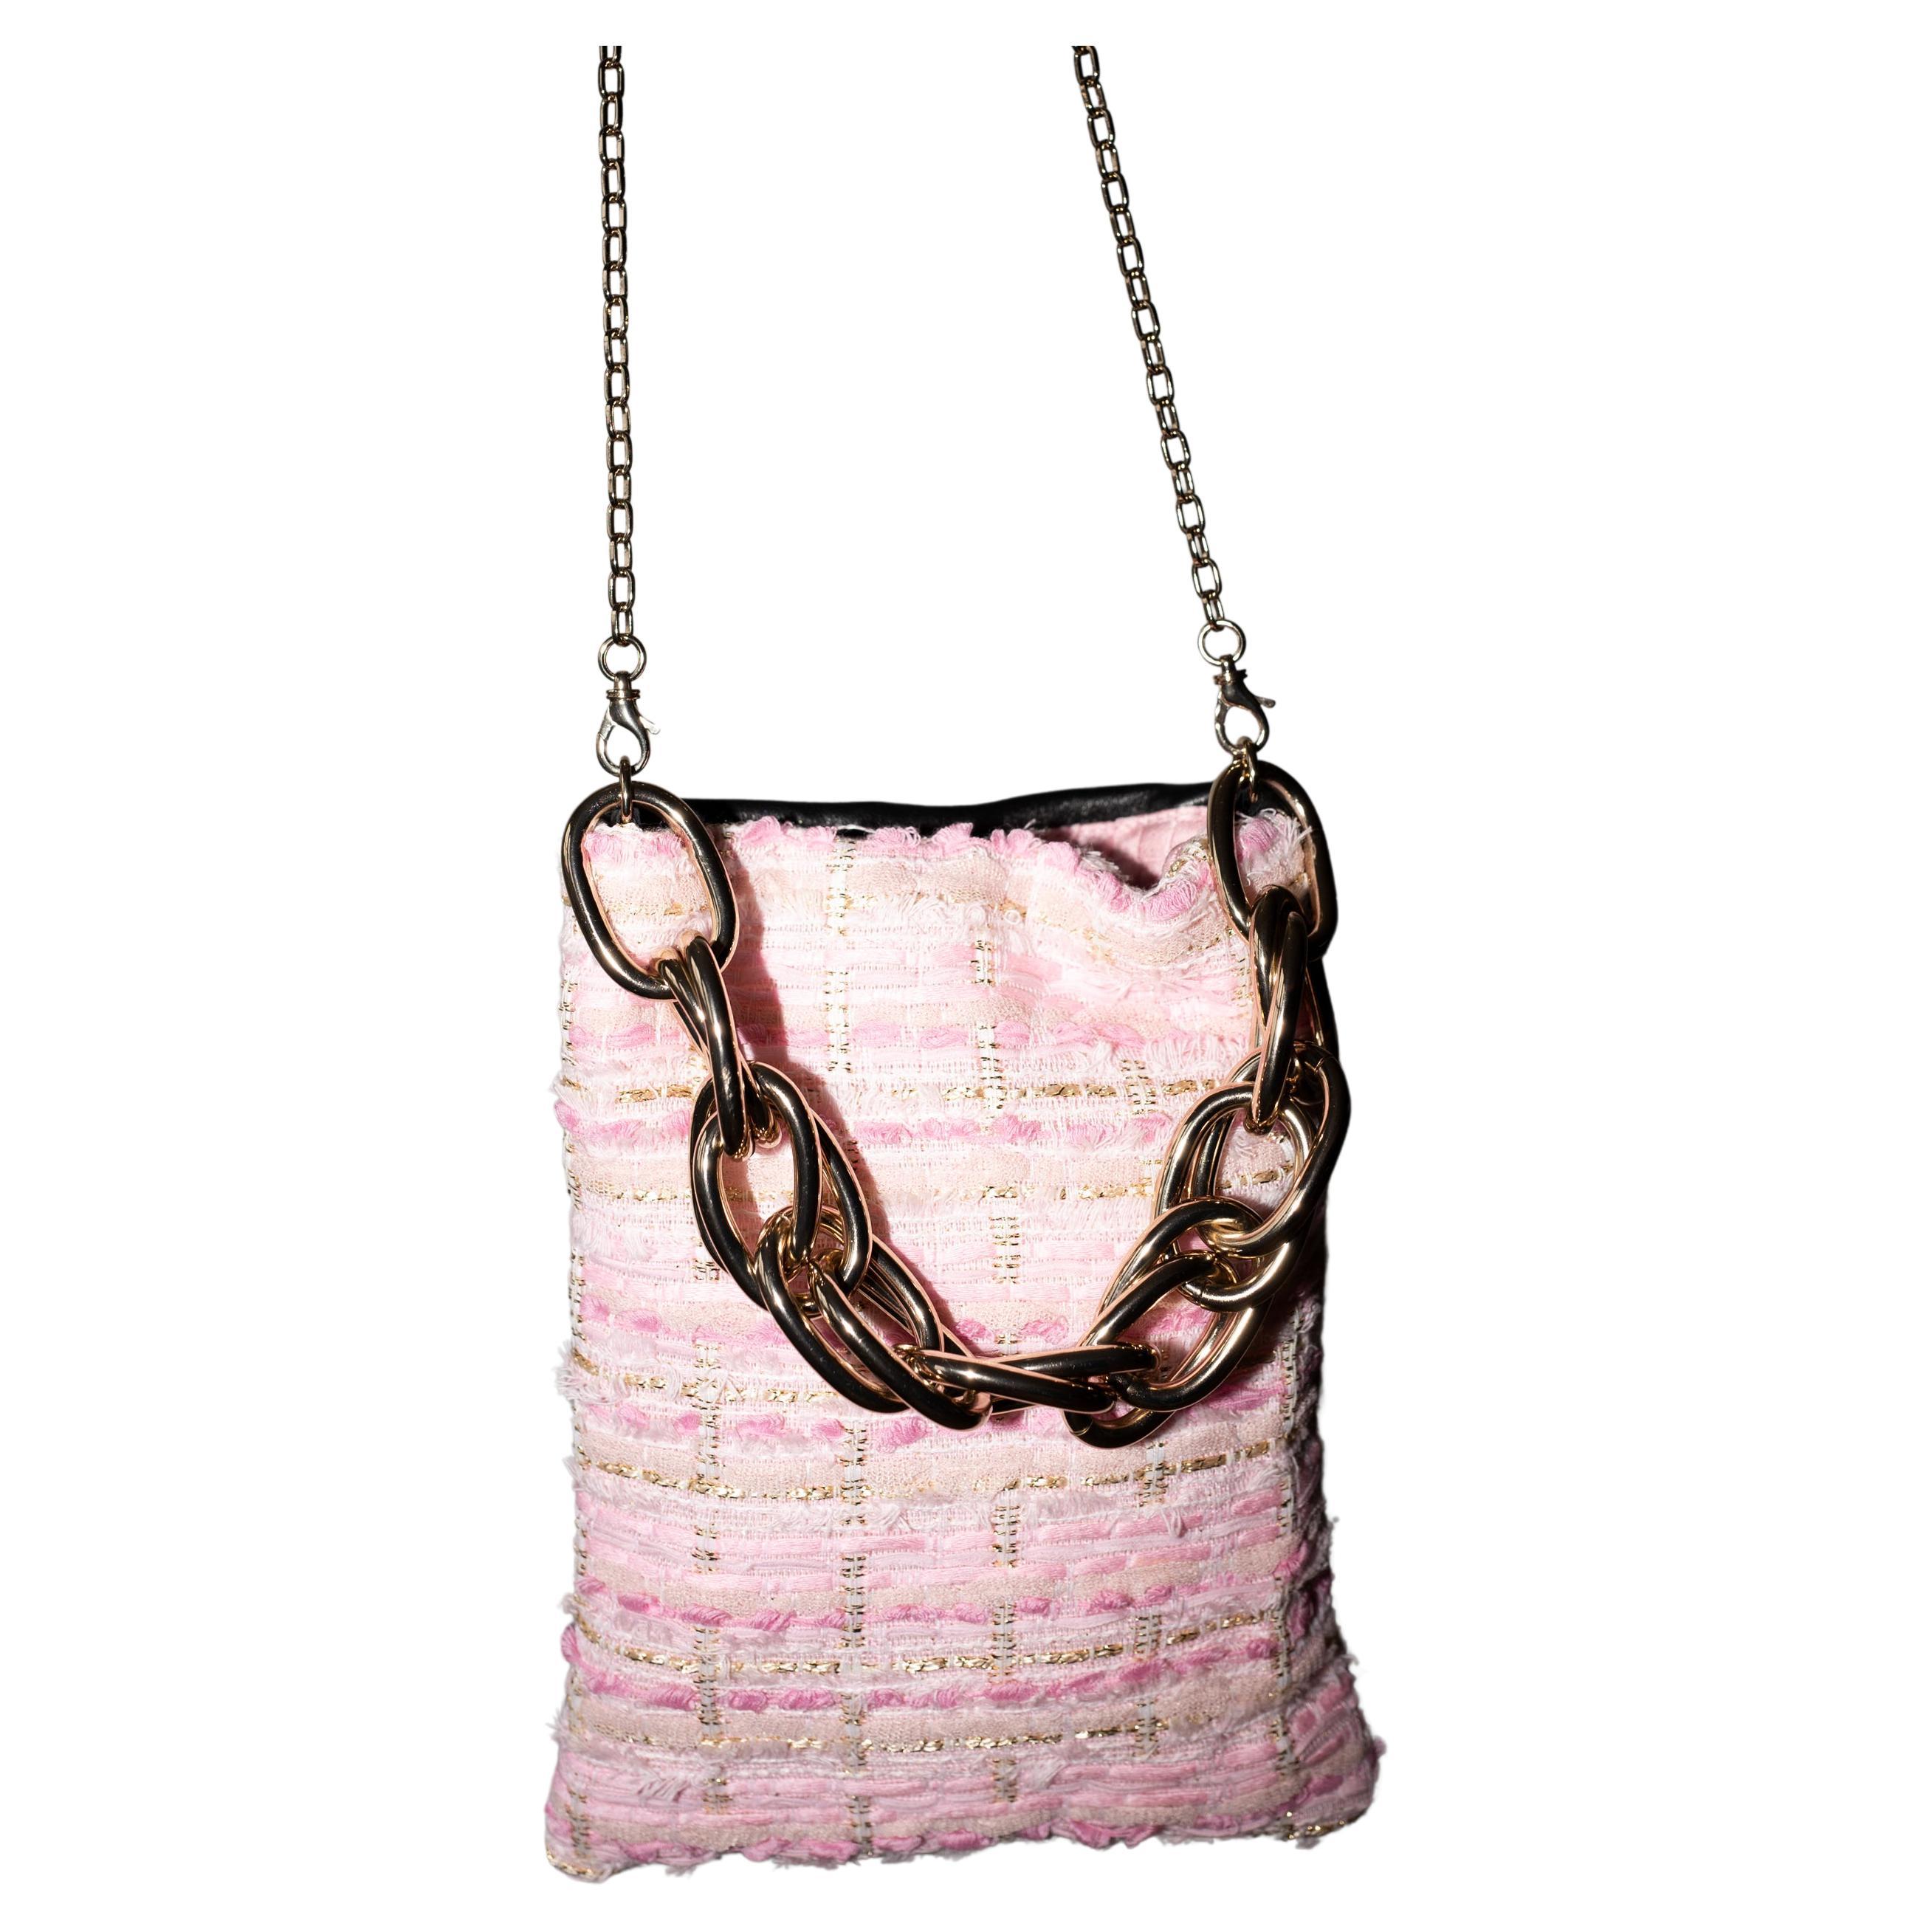 French Pastel Light Pink Lurex Gold Tweed and Black Italian Napa Leather with Long Shoulder Gold Plated Brass Chain  and Chunk Chain Handle Evening Bag J Dauphin

Size: Height 21 cm, Width 17 cm, Length of Chain including Hooks 111 cm

Brand: J